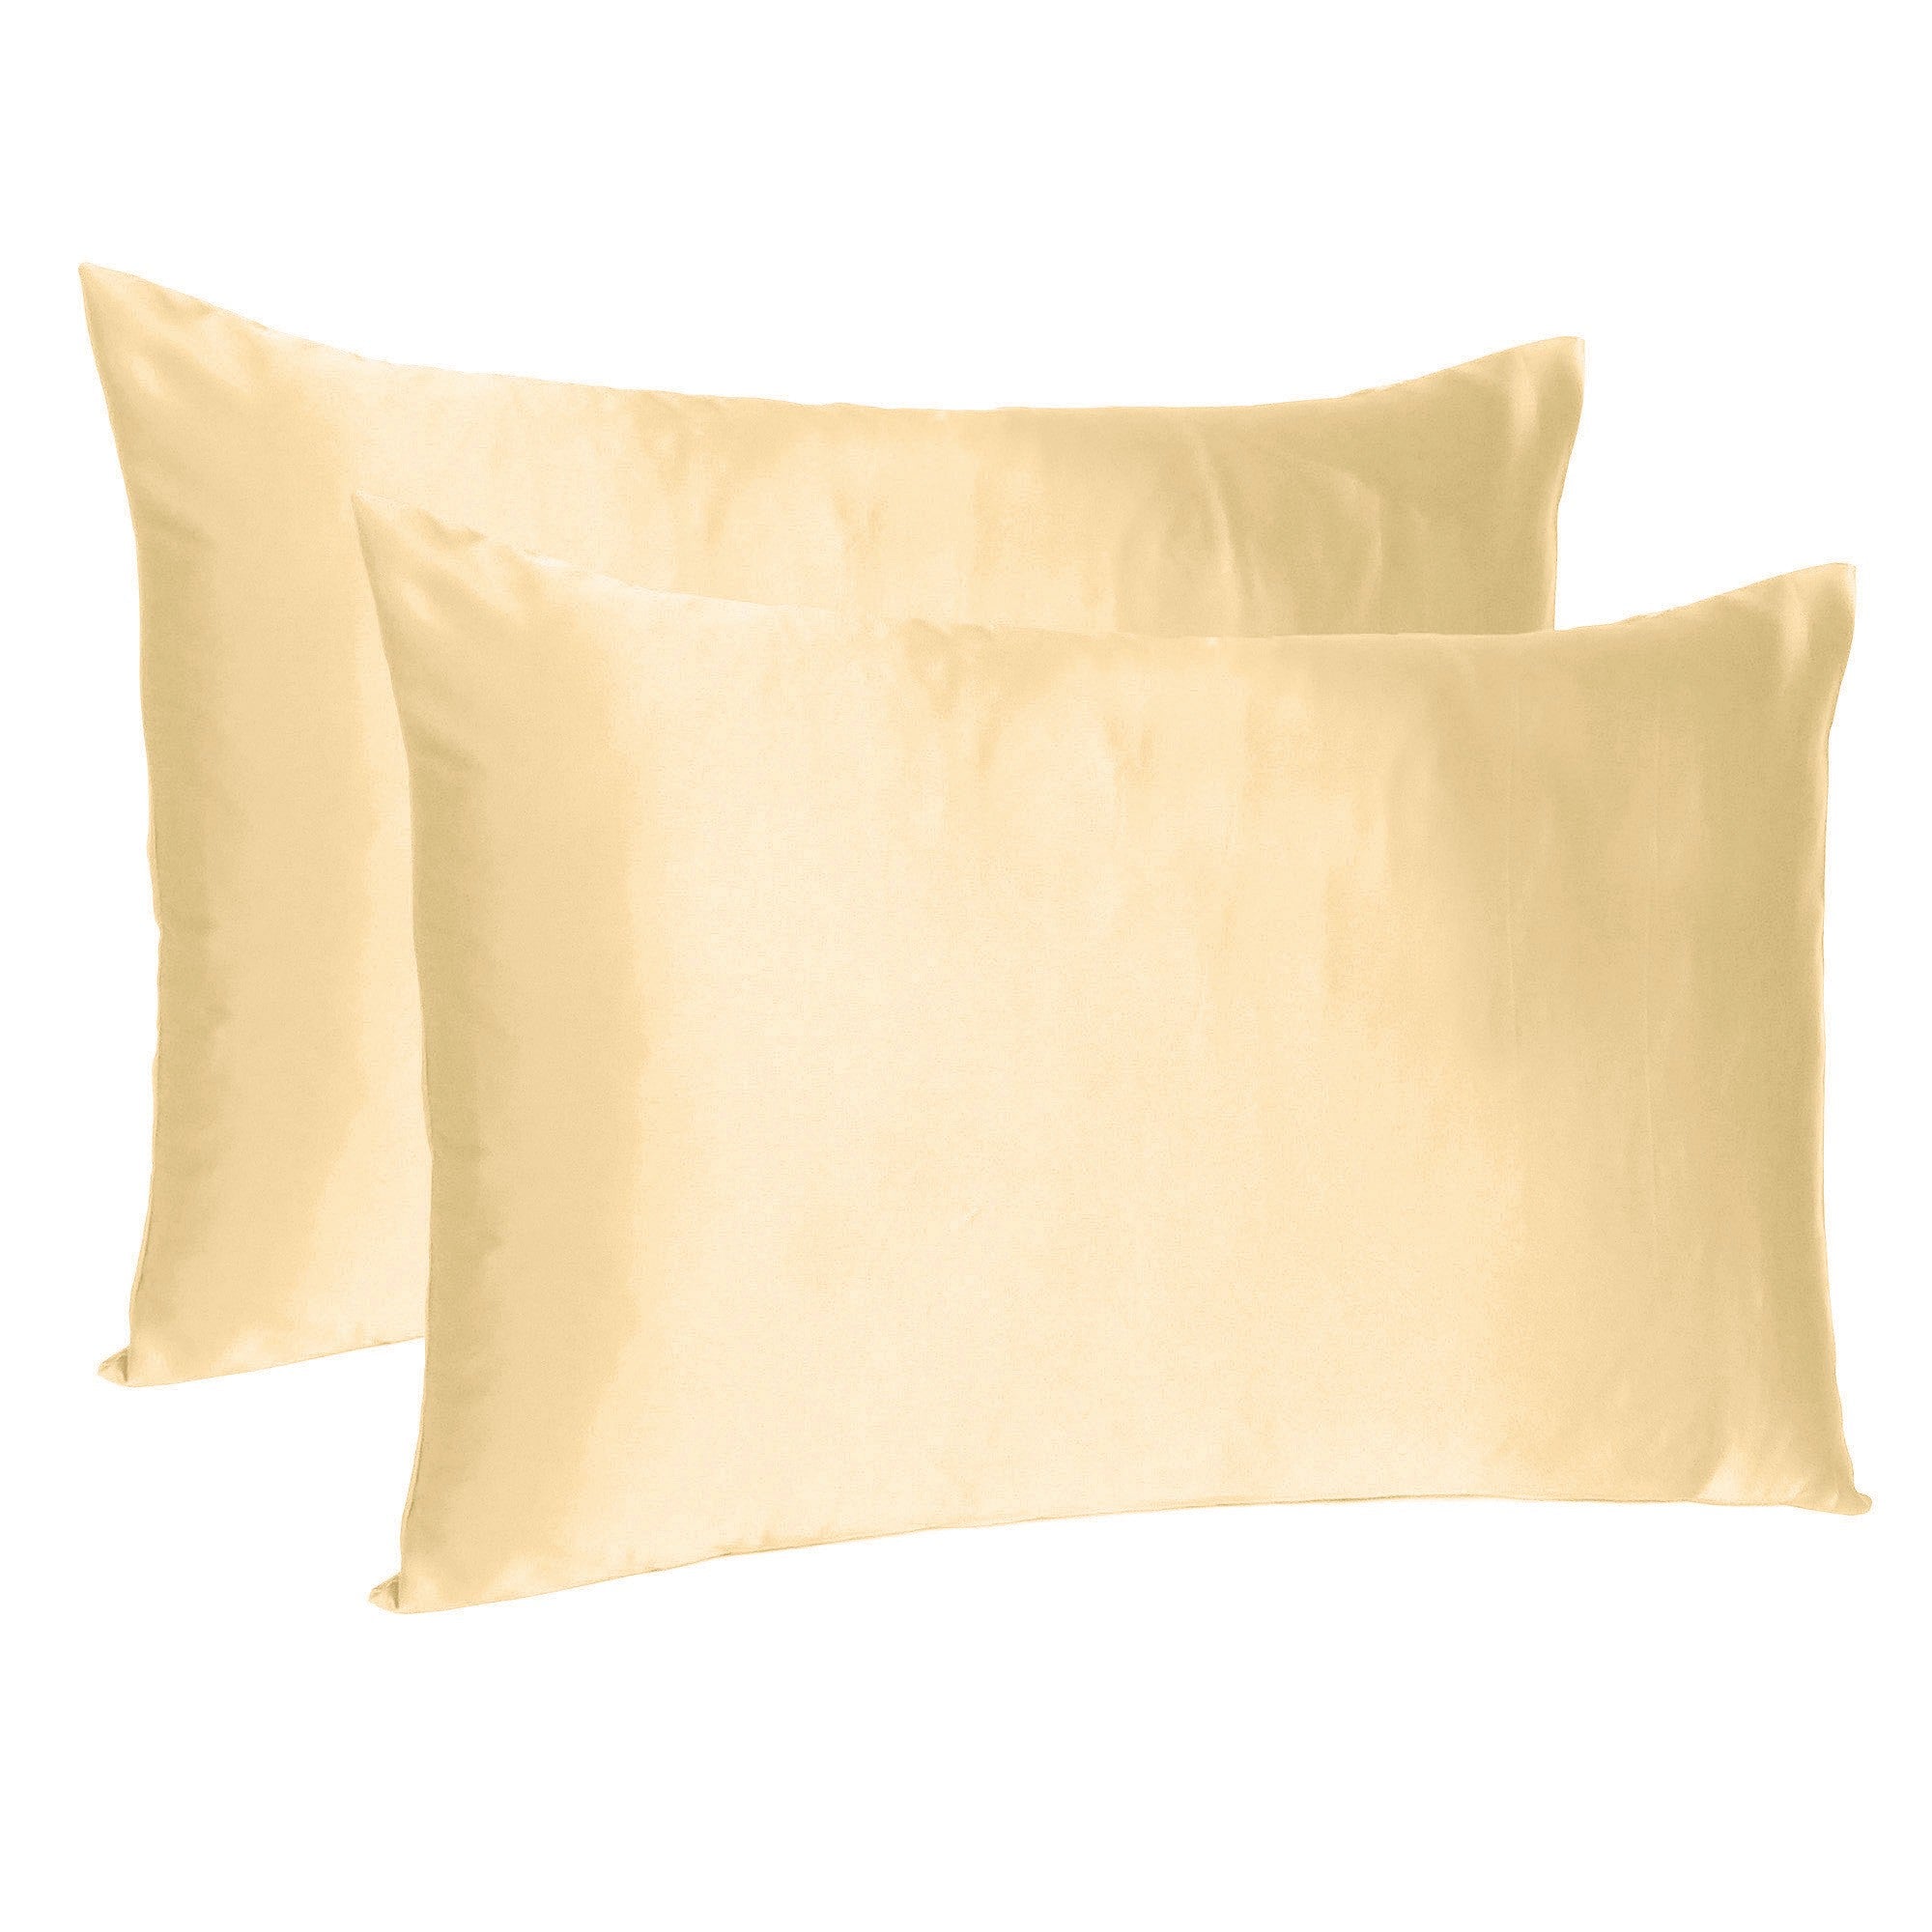 Pale-Peach-Dreamy-Set-Of-2-Silky-Satin-Queen-Pillowcases-Bed-Sheets